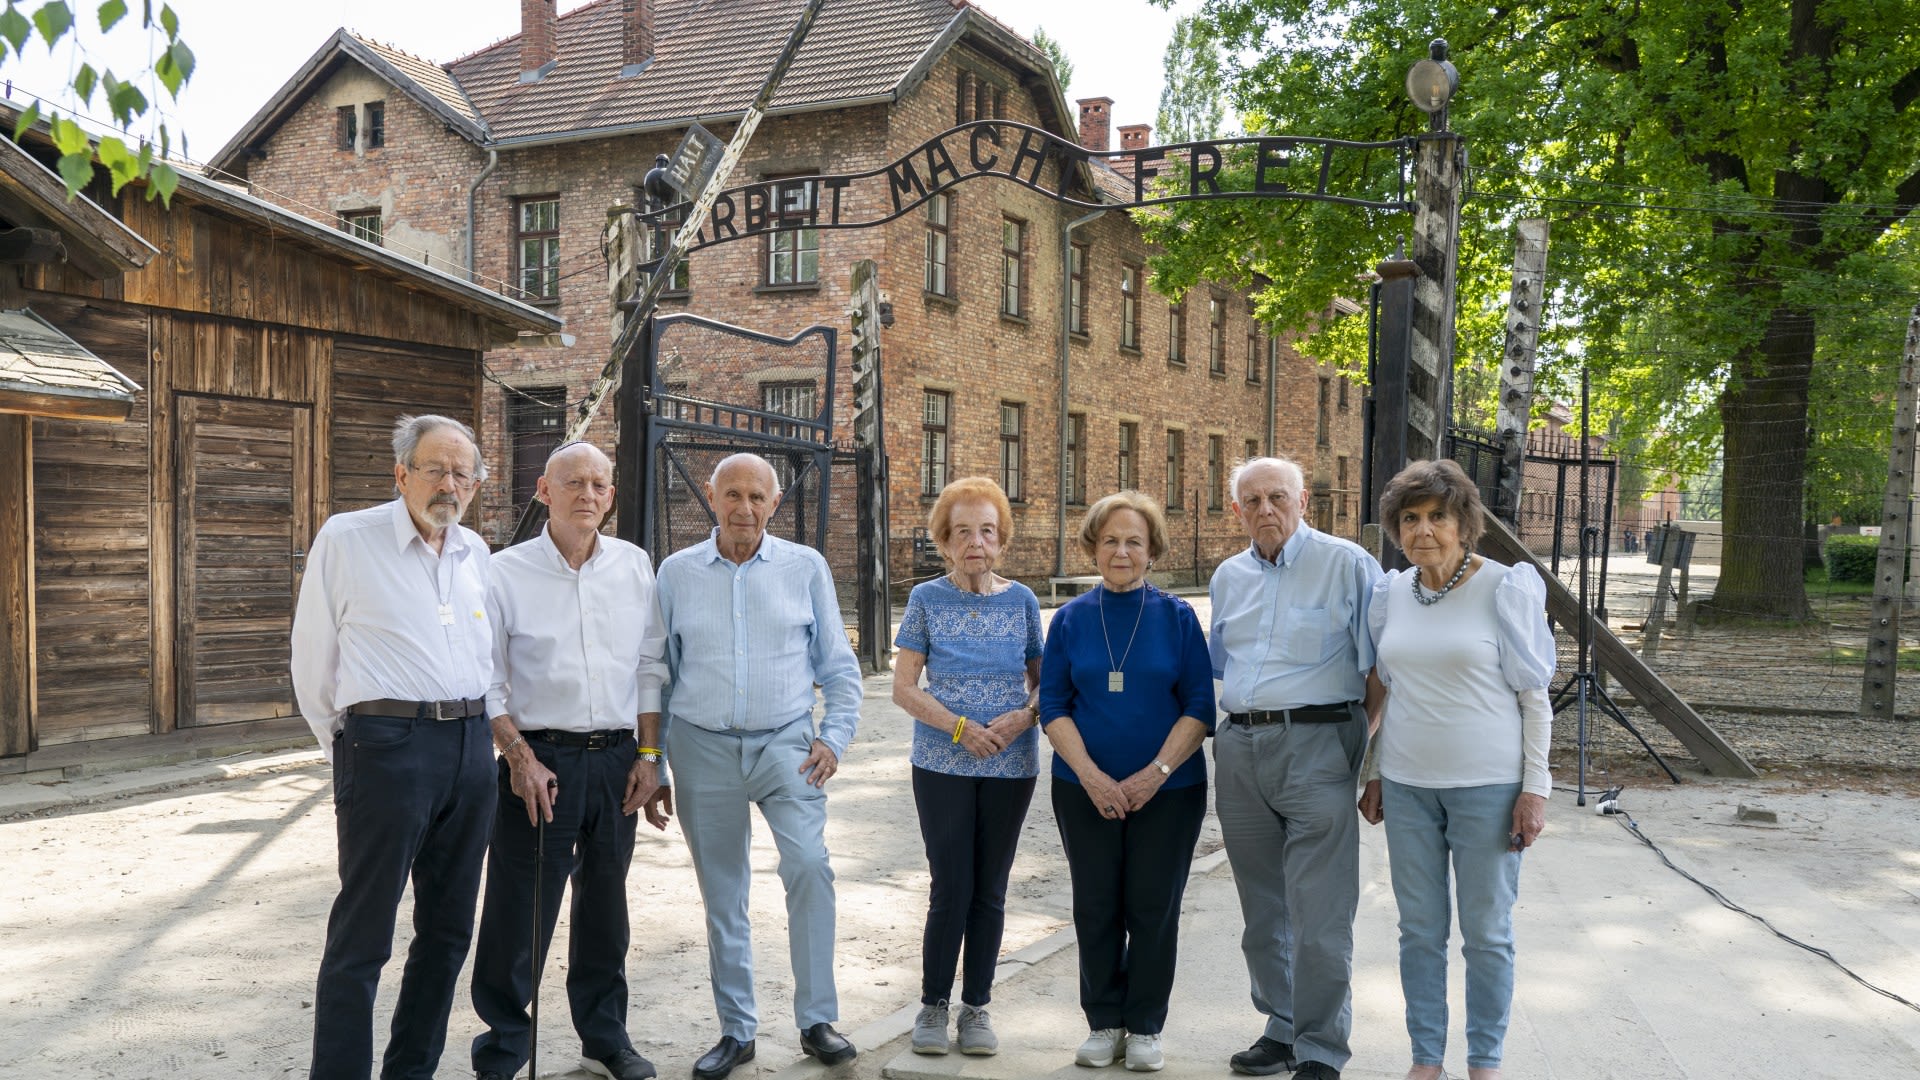 Humanity has not learned its lesson from Holocaust, say 7 survivors